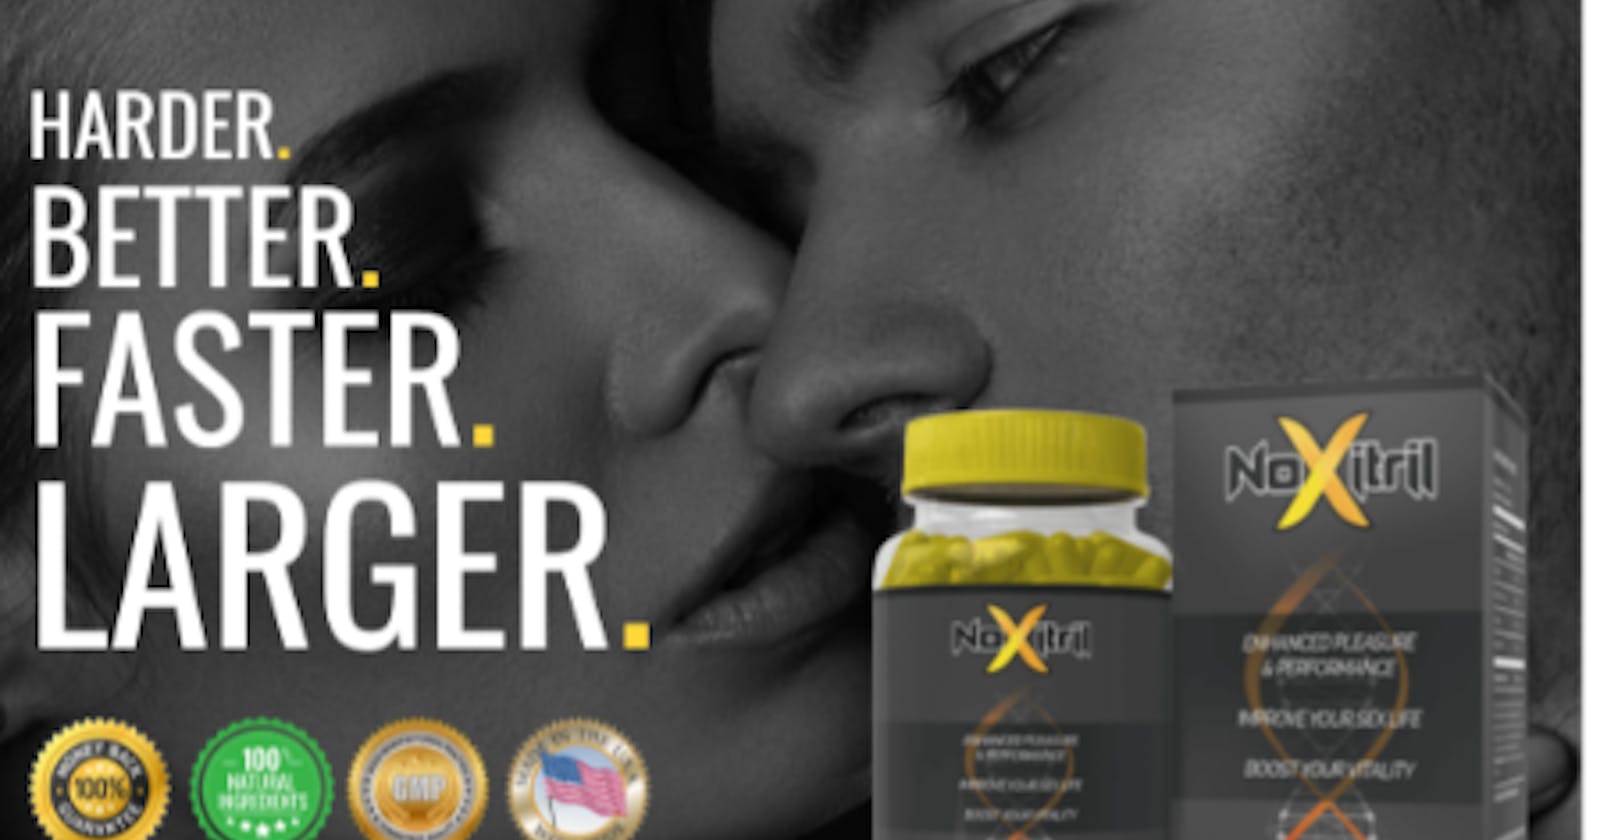 Noxitril Male Enhancement Can I Improve My Sexual Performance Naturally?